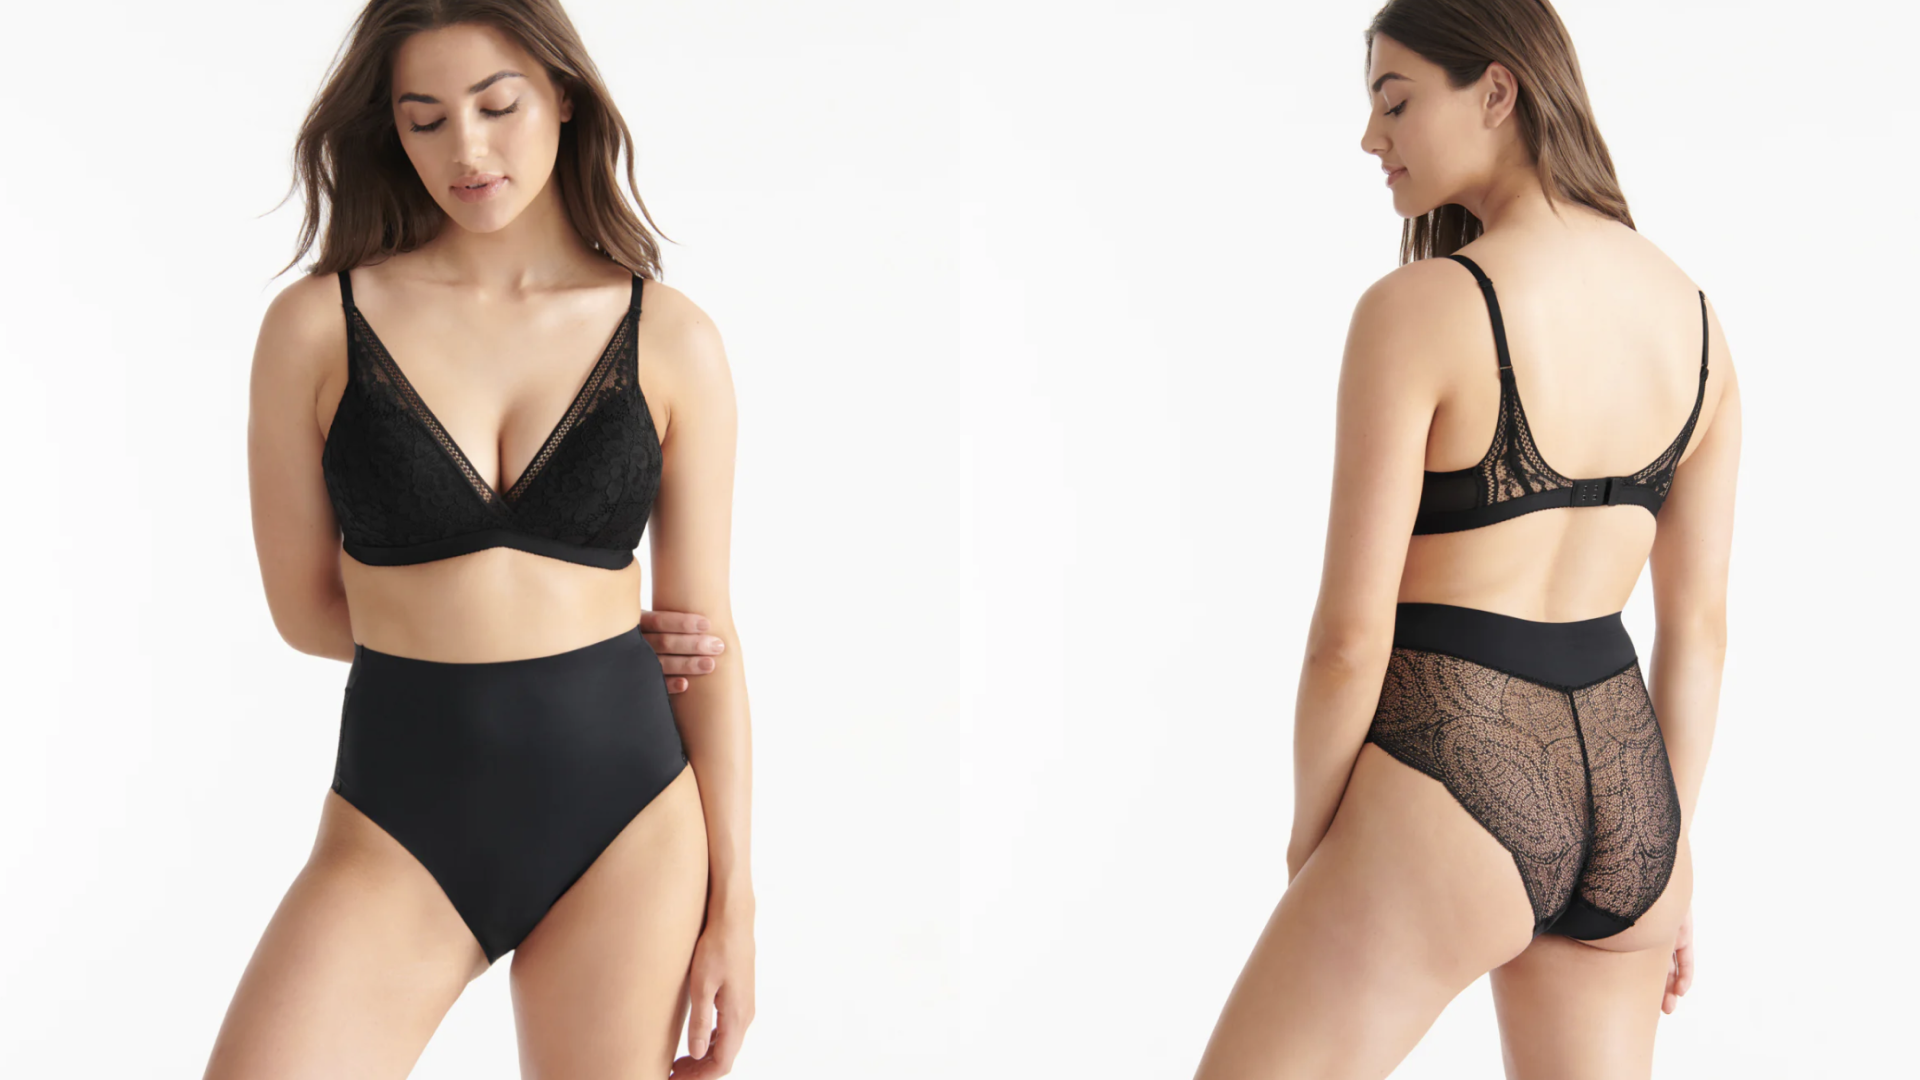 Comfy Bra and Panty Sets You'll Want to Wear Daily